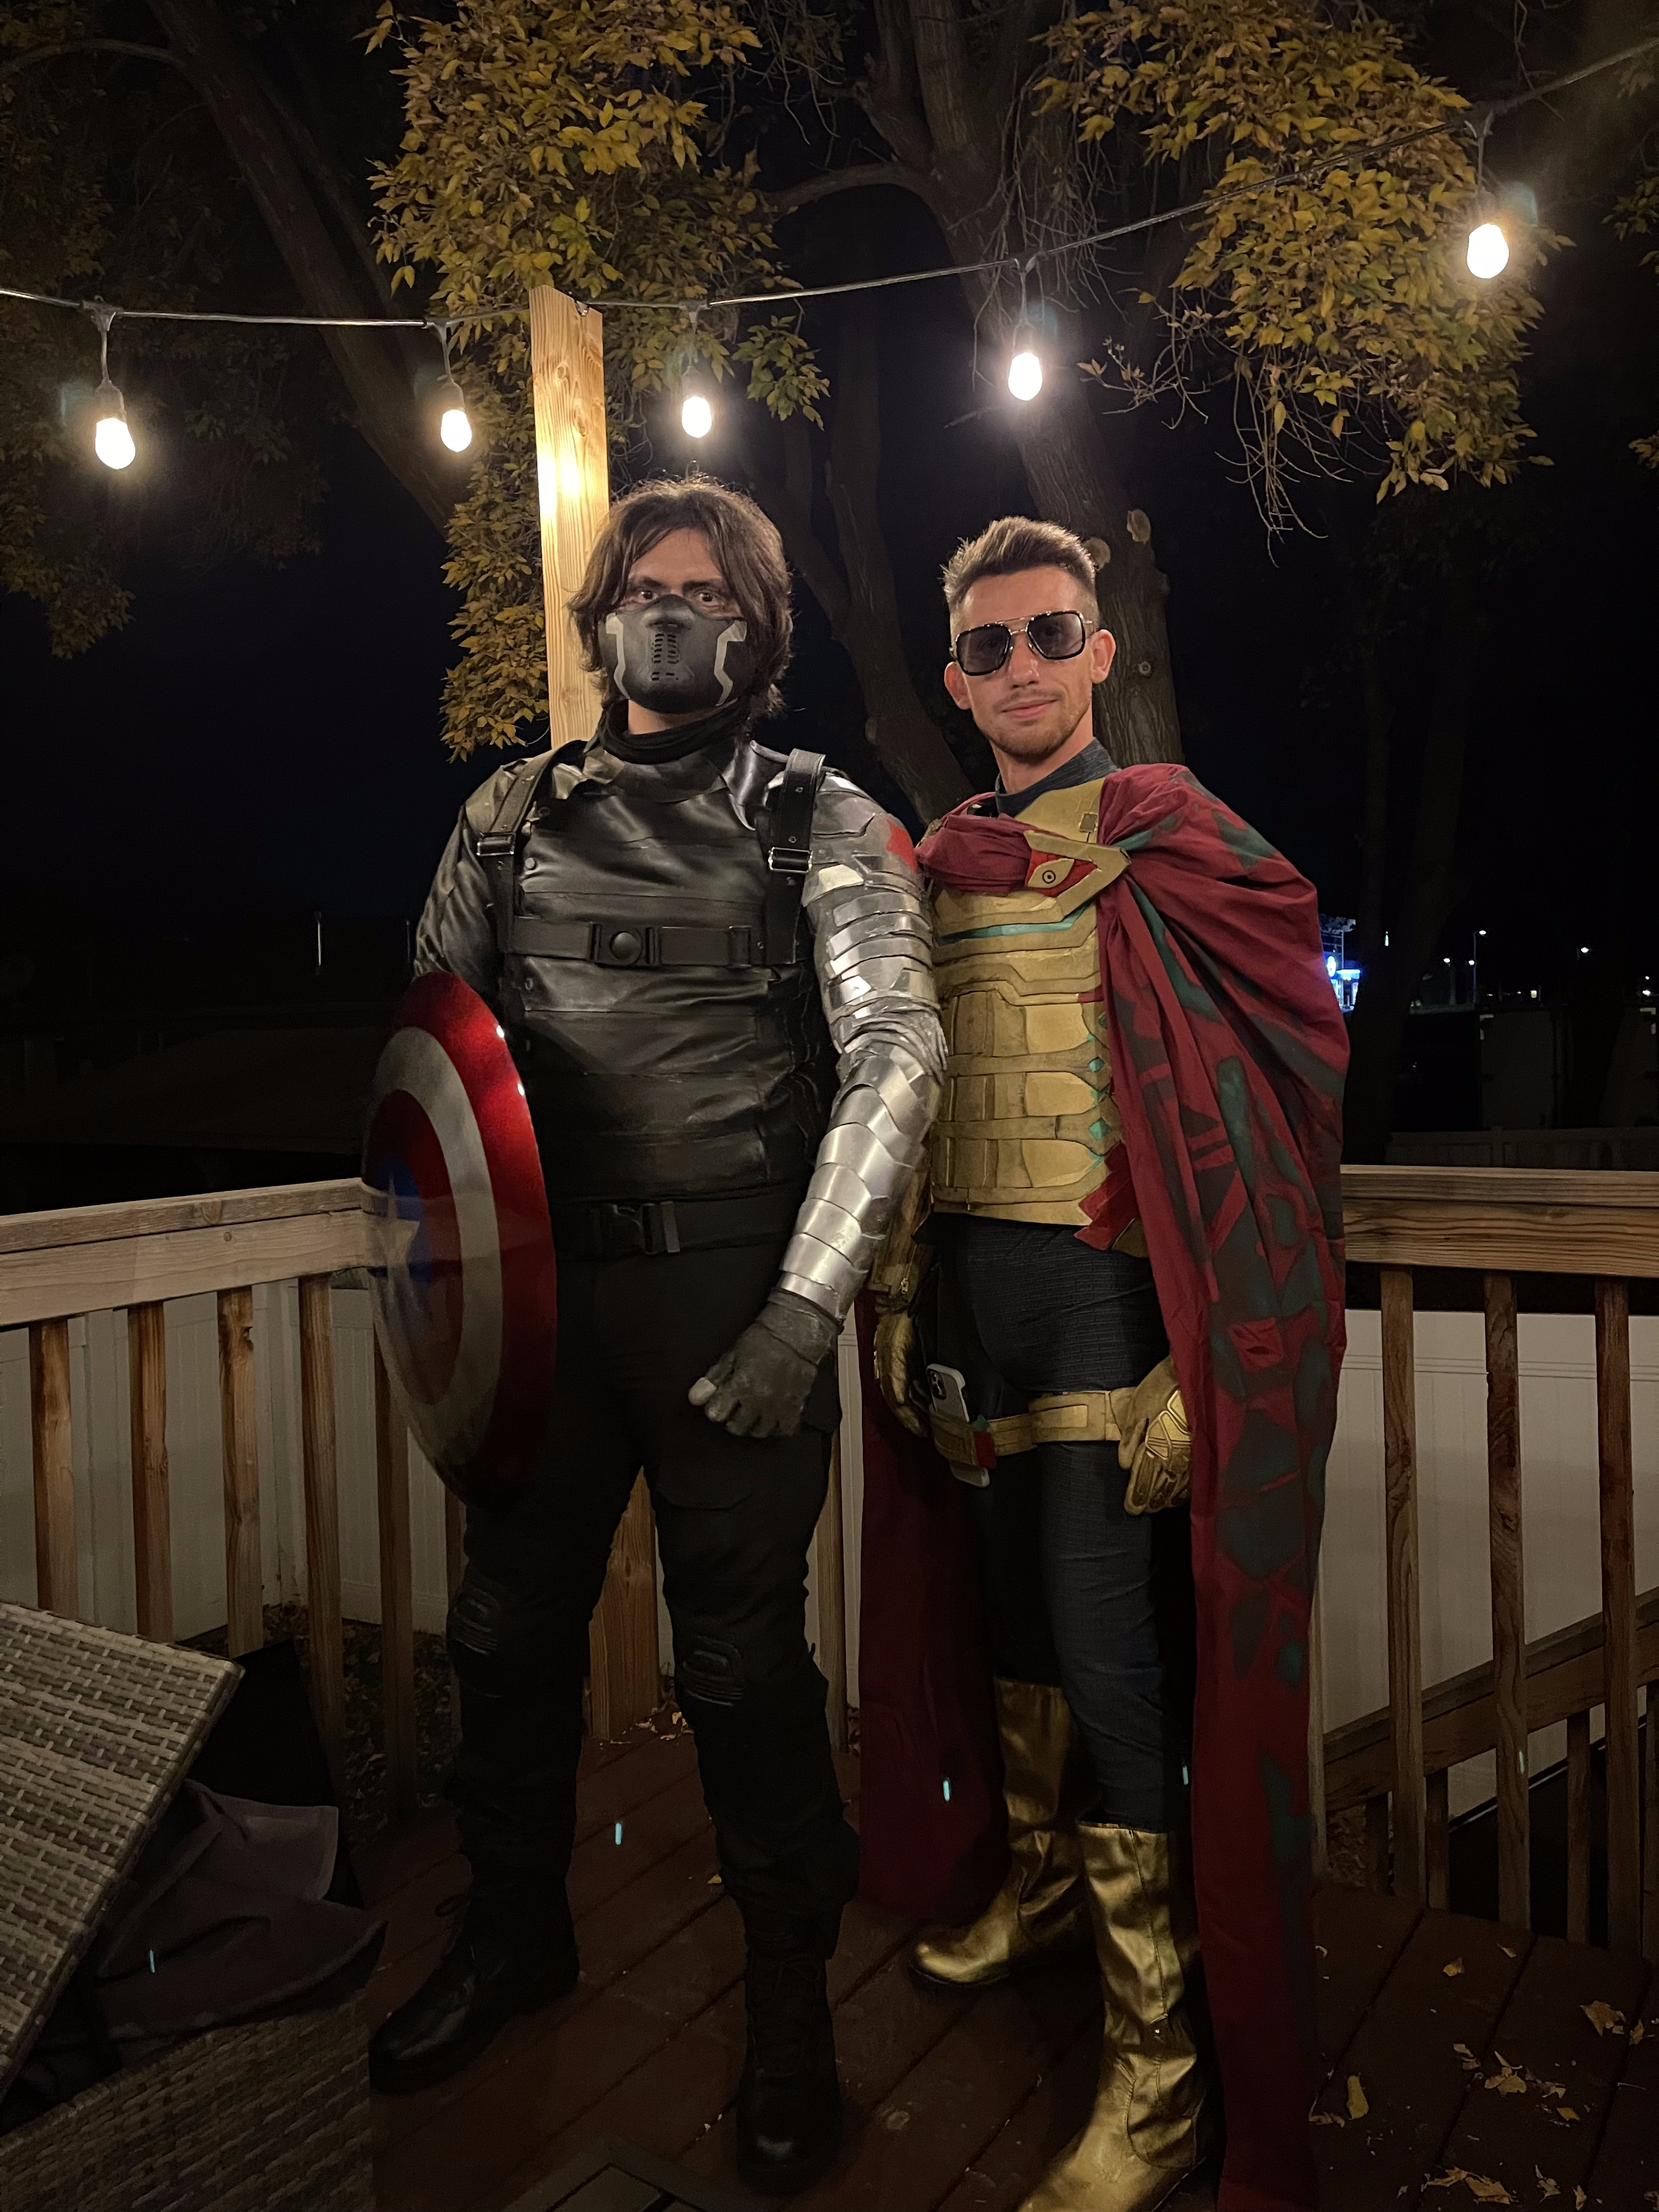 Stephen dressed as the Winter Soldier and Devan dressed as Mysterio